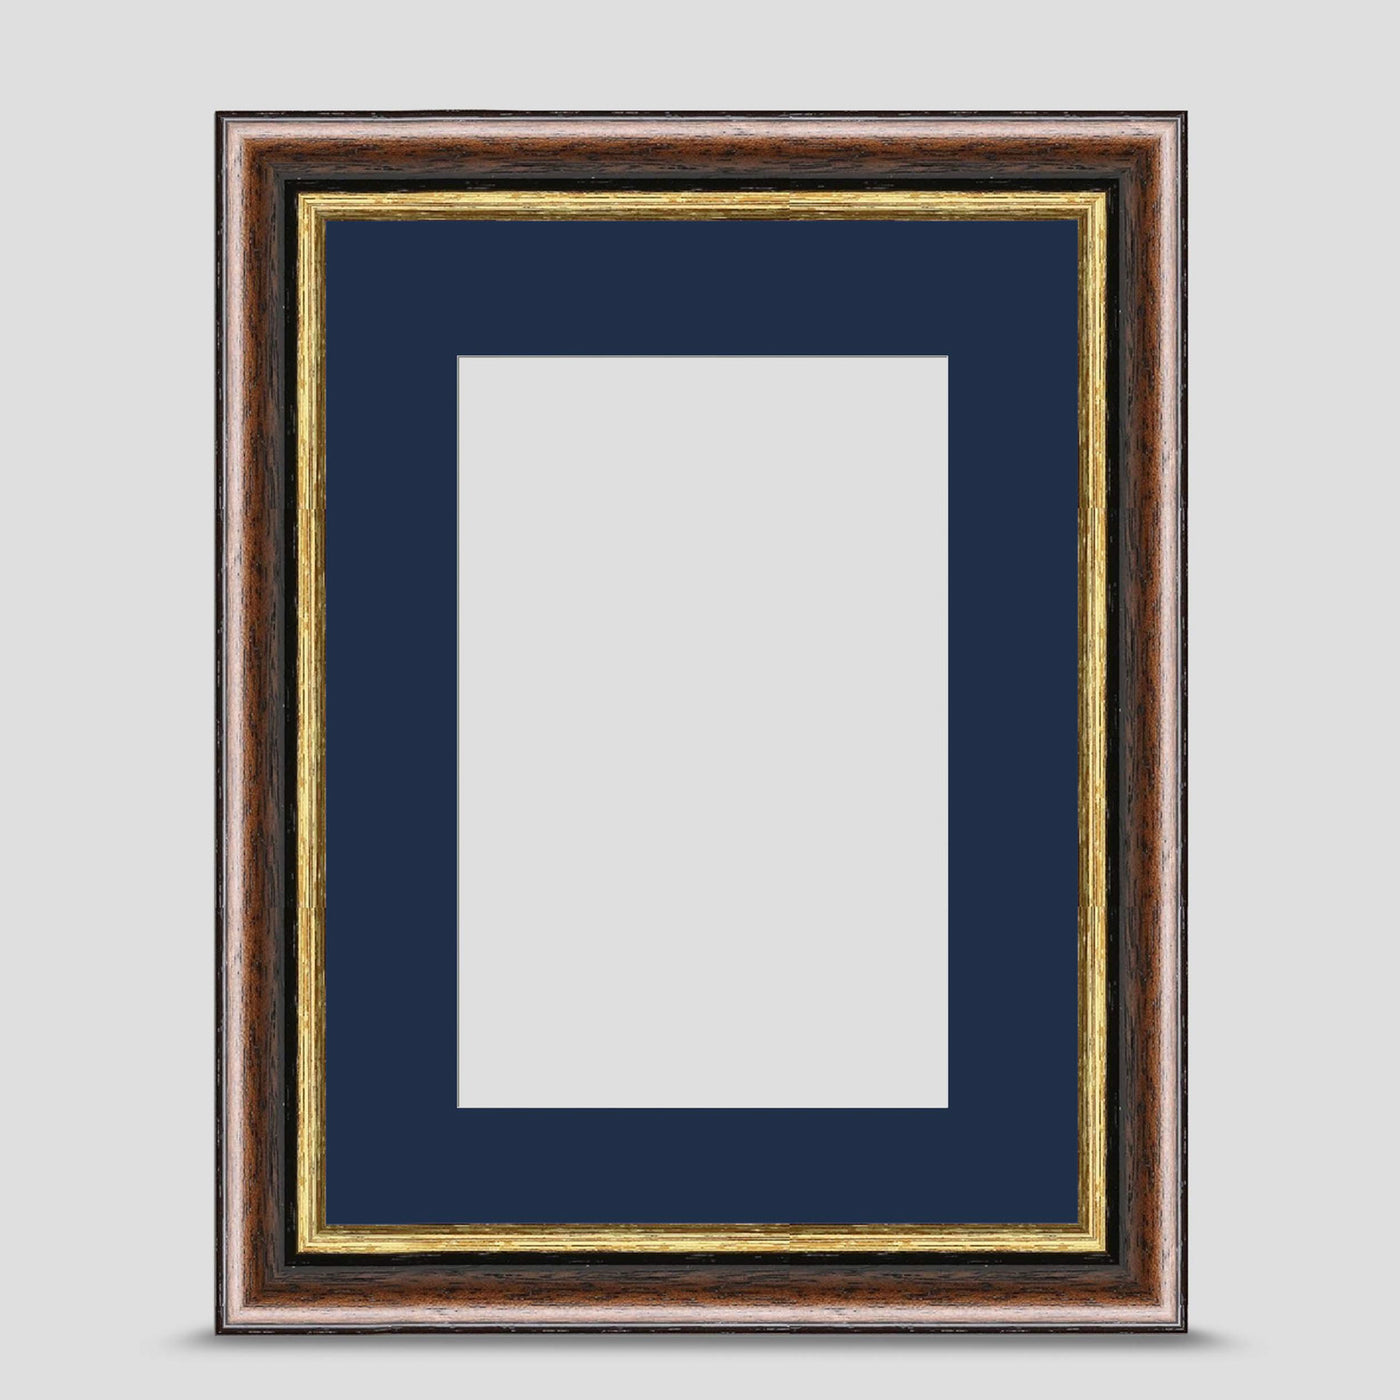 8x6 Brown & Gold Picture Frame with a 6x4 Mount